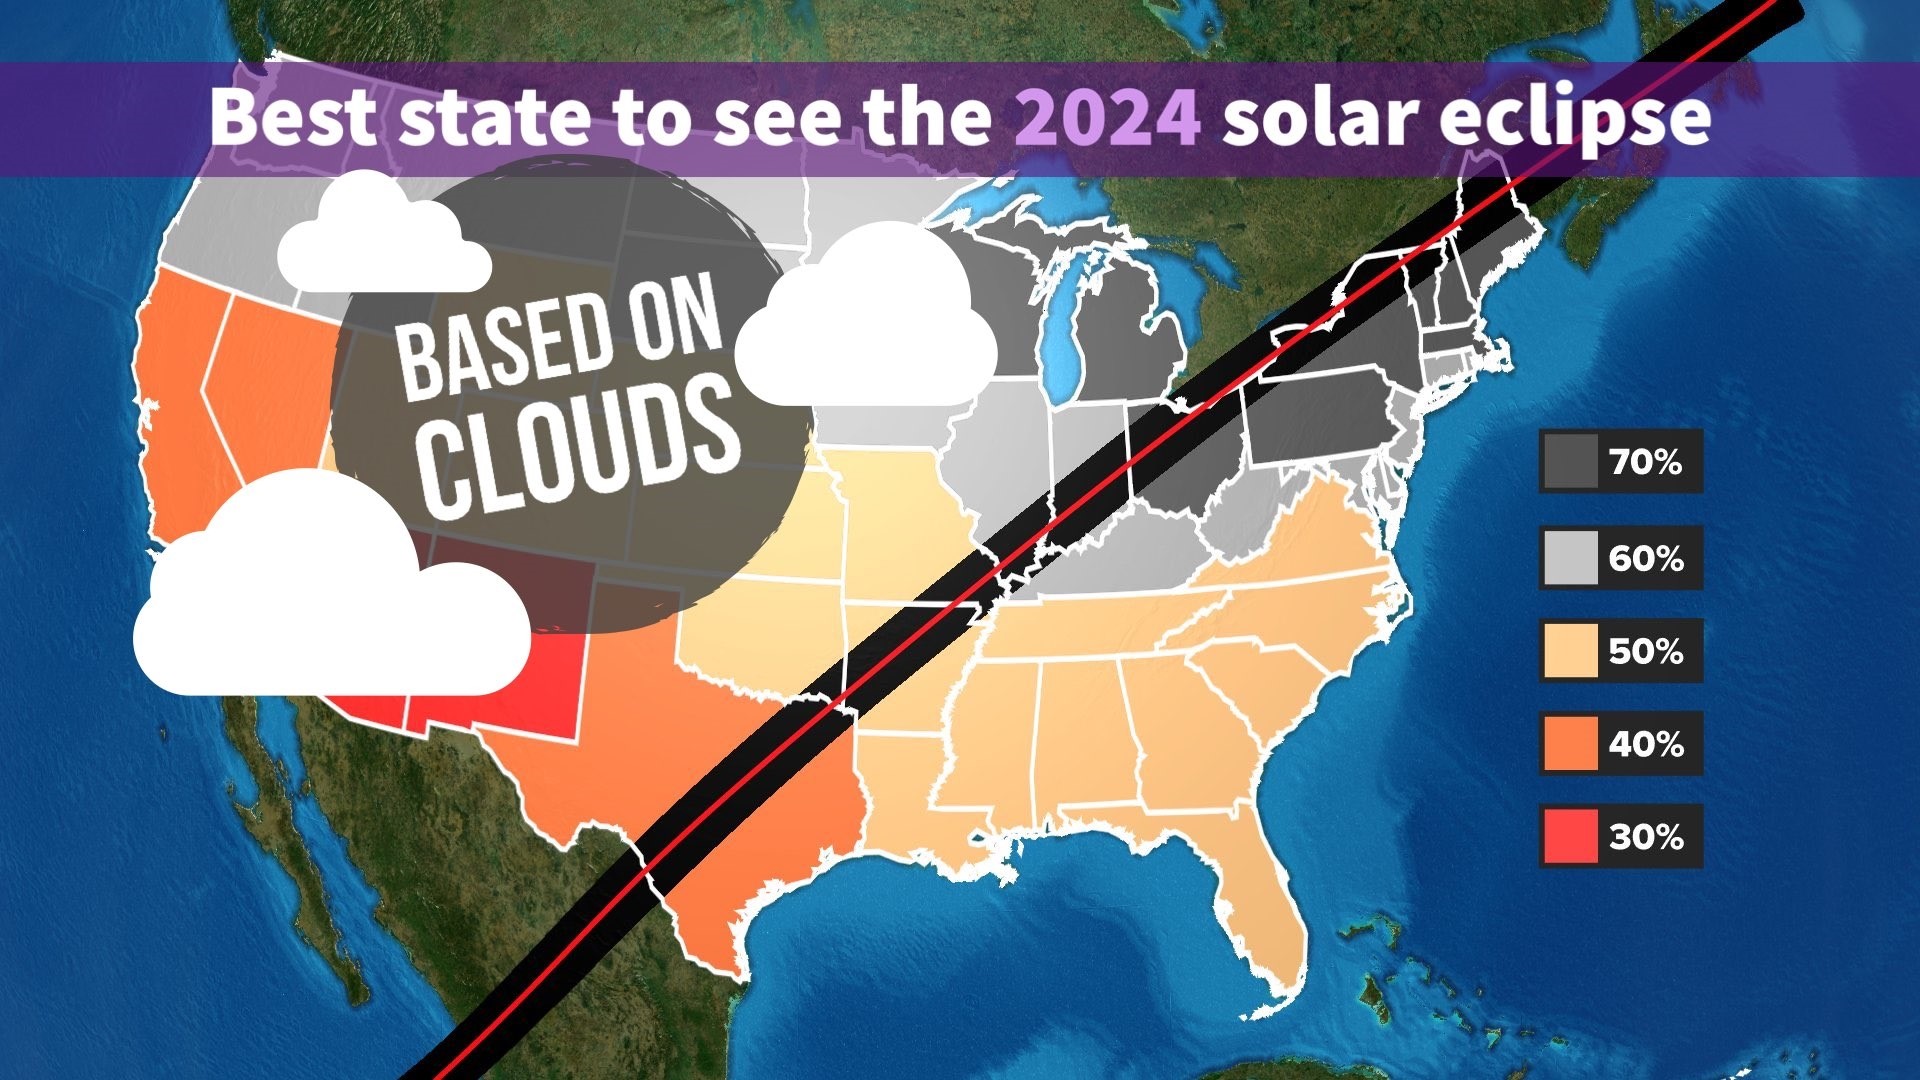 As you are waiting for totality to occur from the solar eclipse, the last thing you want is a cloud to move overhead and block your view. Where should you go?